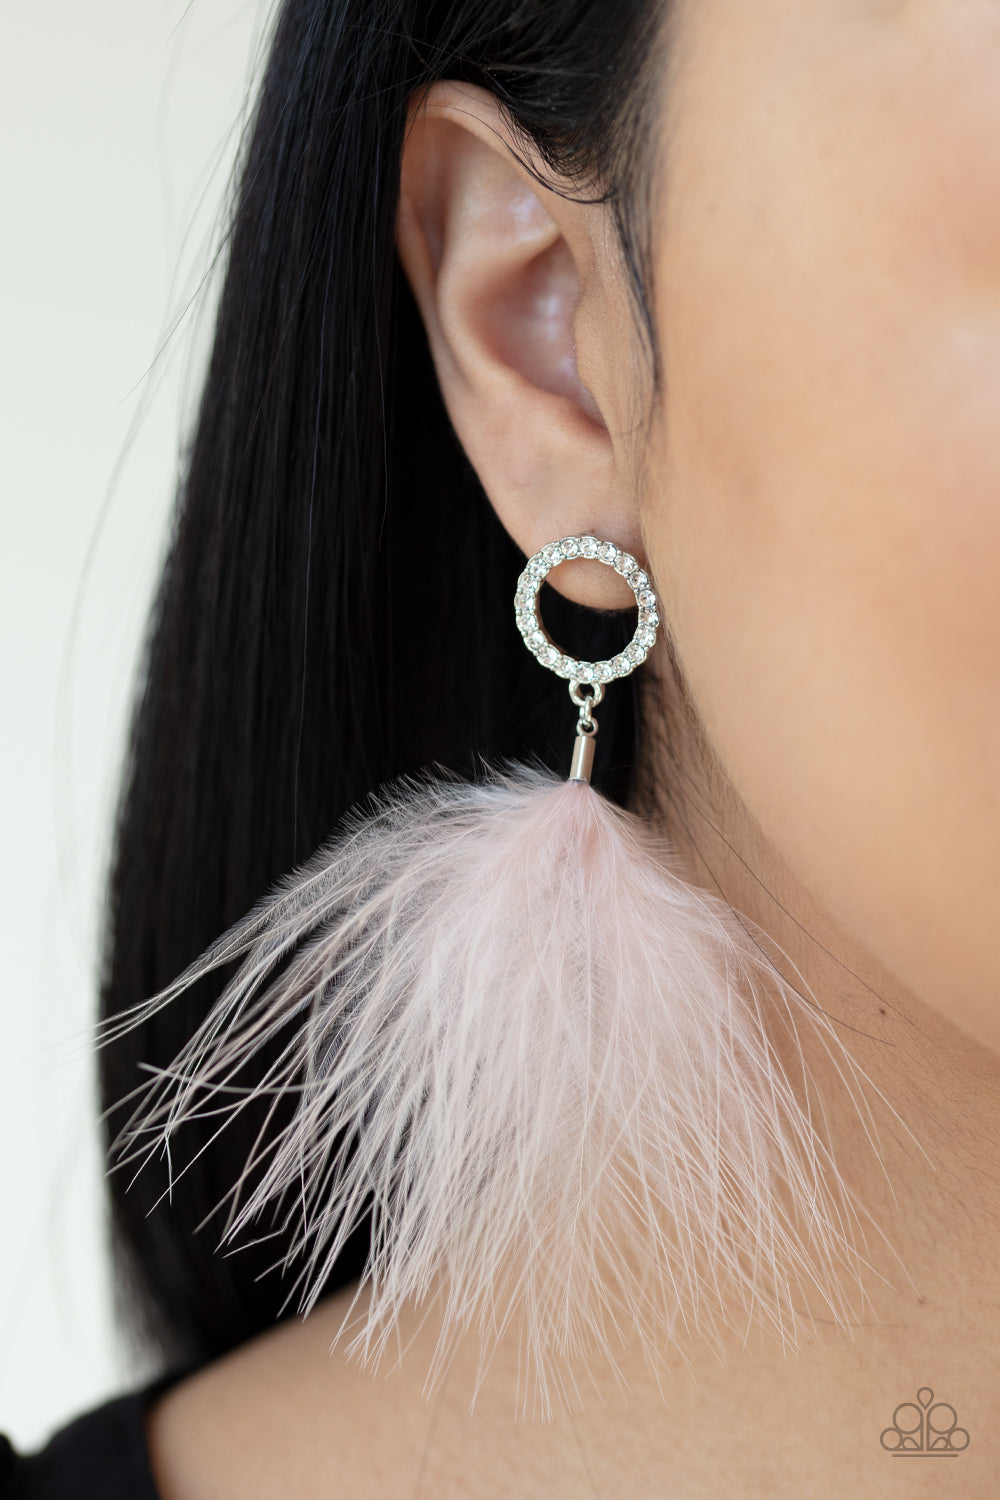 Paparazzi Jewelry & Accessories - BOA Down - Pink Earrings. Bling By Titia Boutique